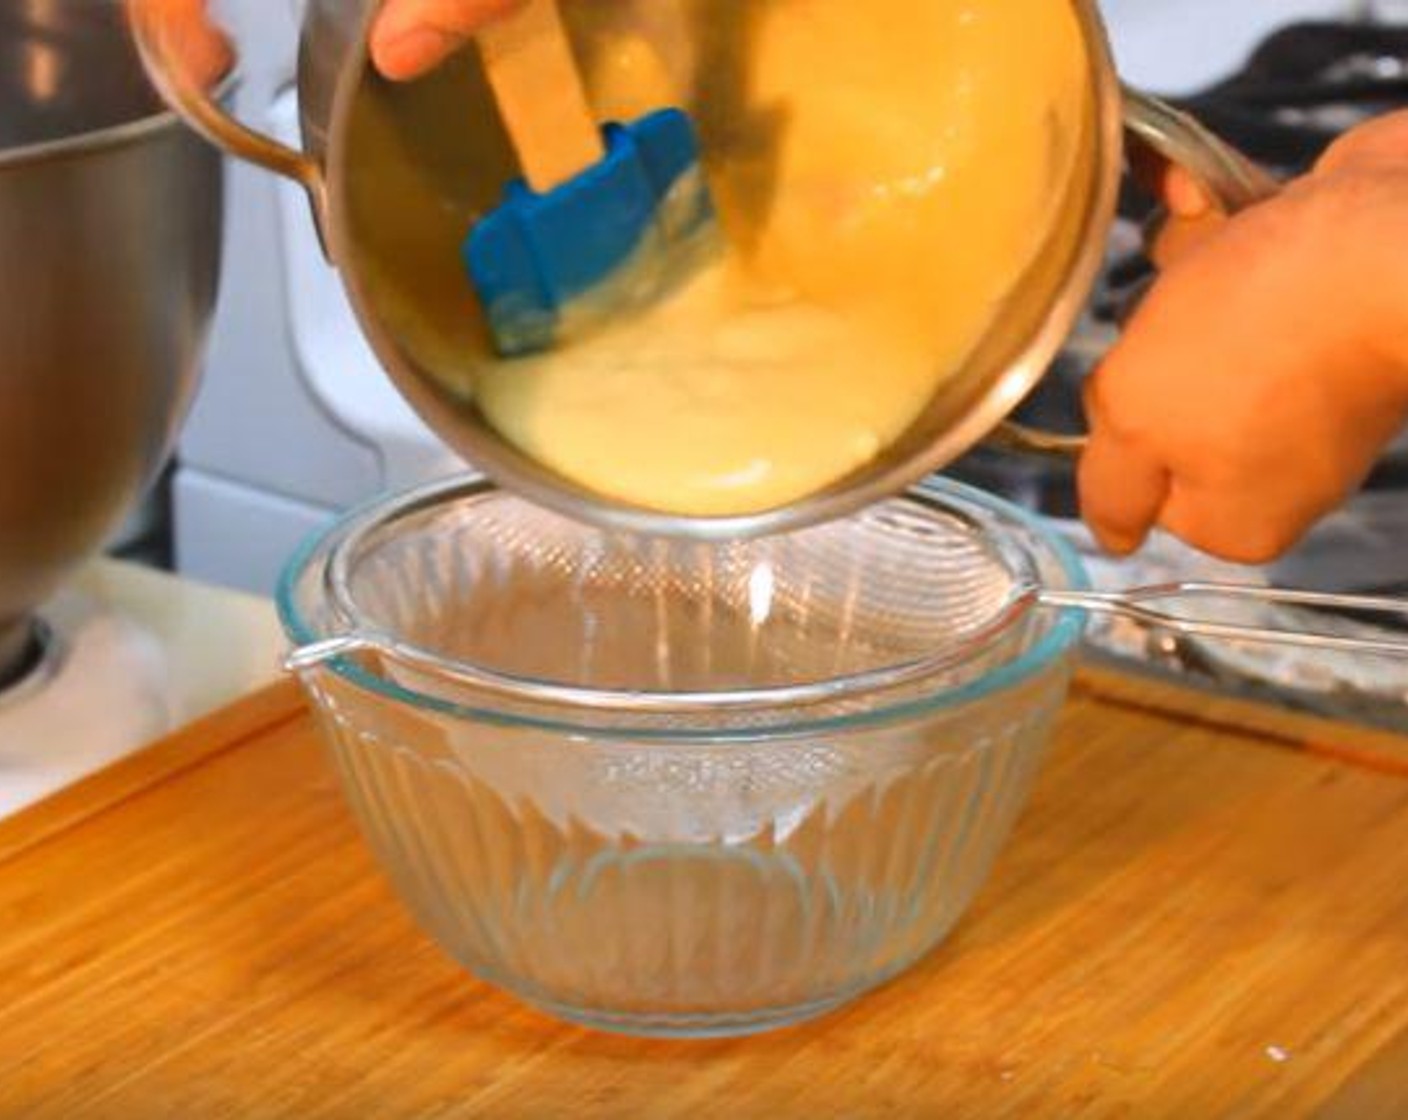 step 5 To make the custard, add the Granulated Sugar (1/4 cup) to the saucepan. Follow it with Whole Milk (1 cup), Egg Yolks, Corn Starch (1 Tbsp) and Vanilla Extract (1 tsp). Whisk together the ingredients until well combined. Over medium heat, stir the custard constantly for 3-8 minutes or until thick. Strain the thickened custard into a bowl to prevent any lumps. Chill covered with plastic wrap in the fridge.